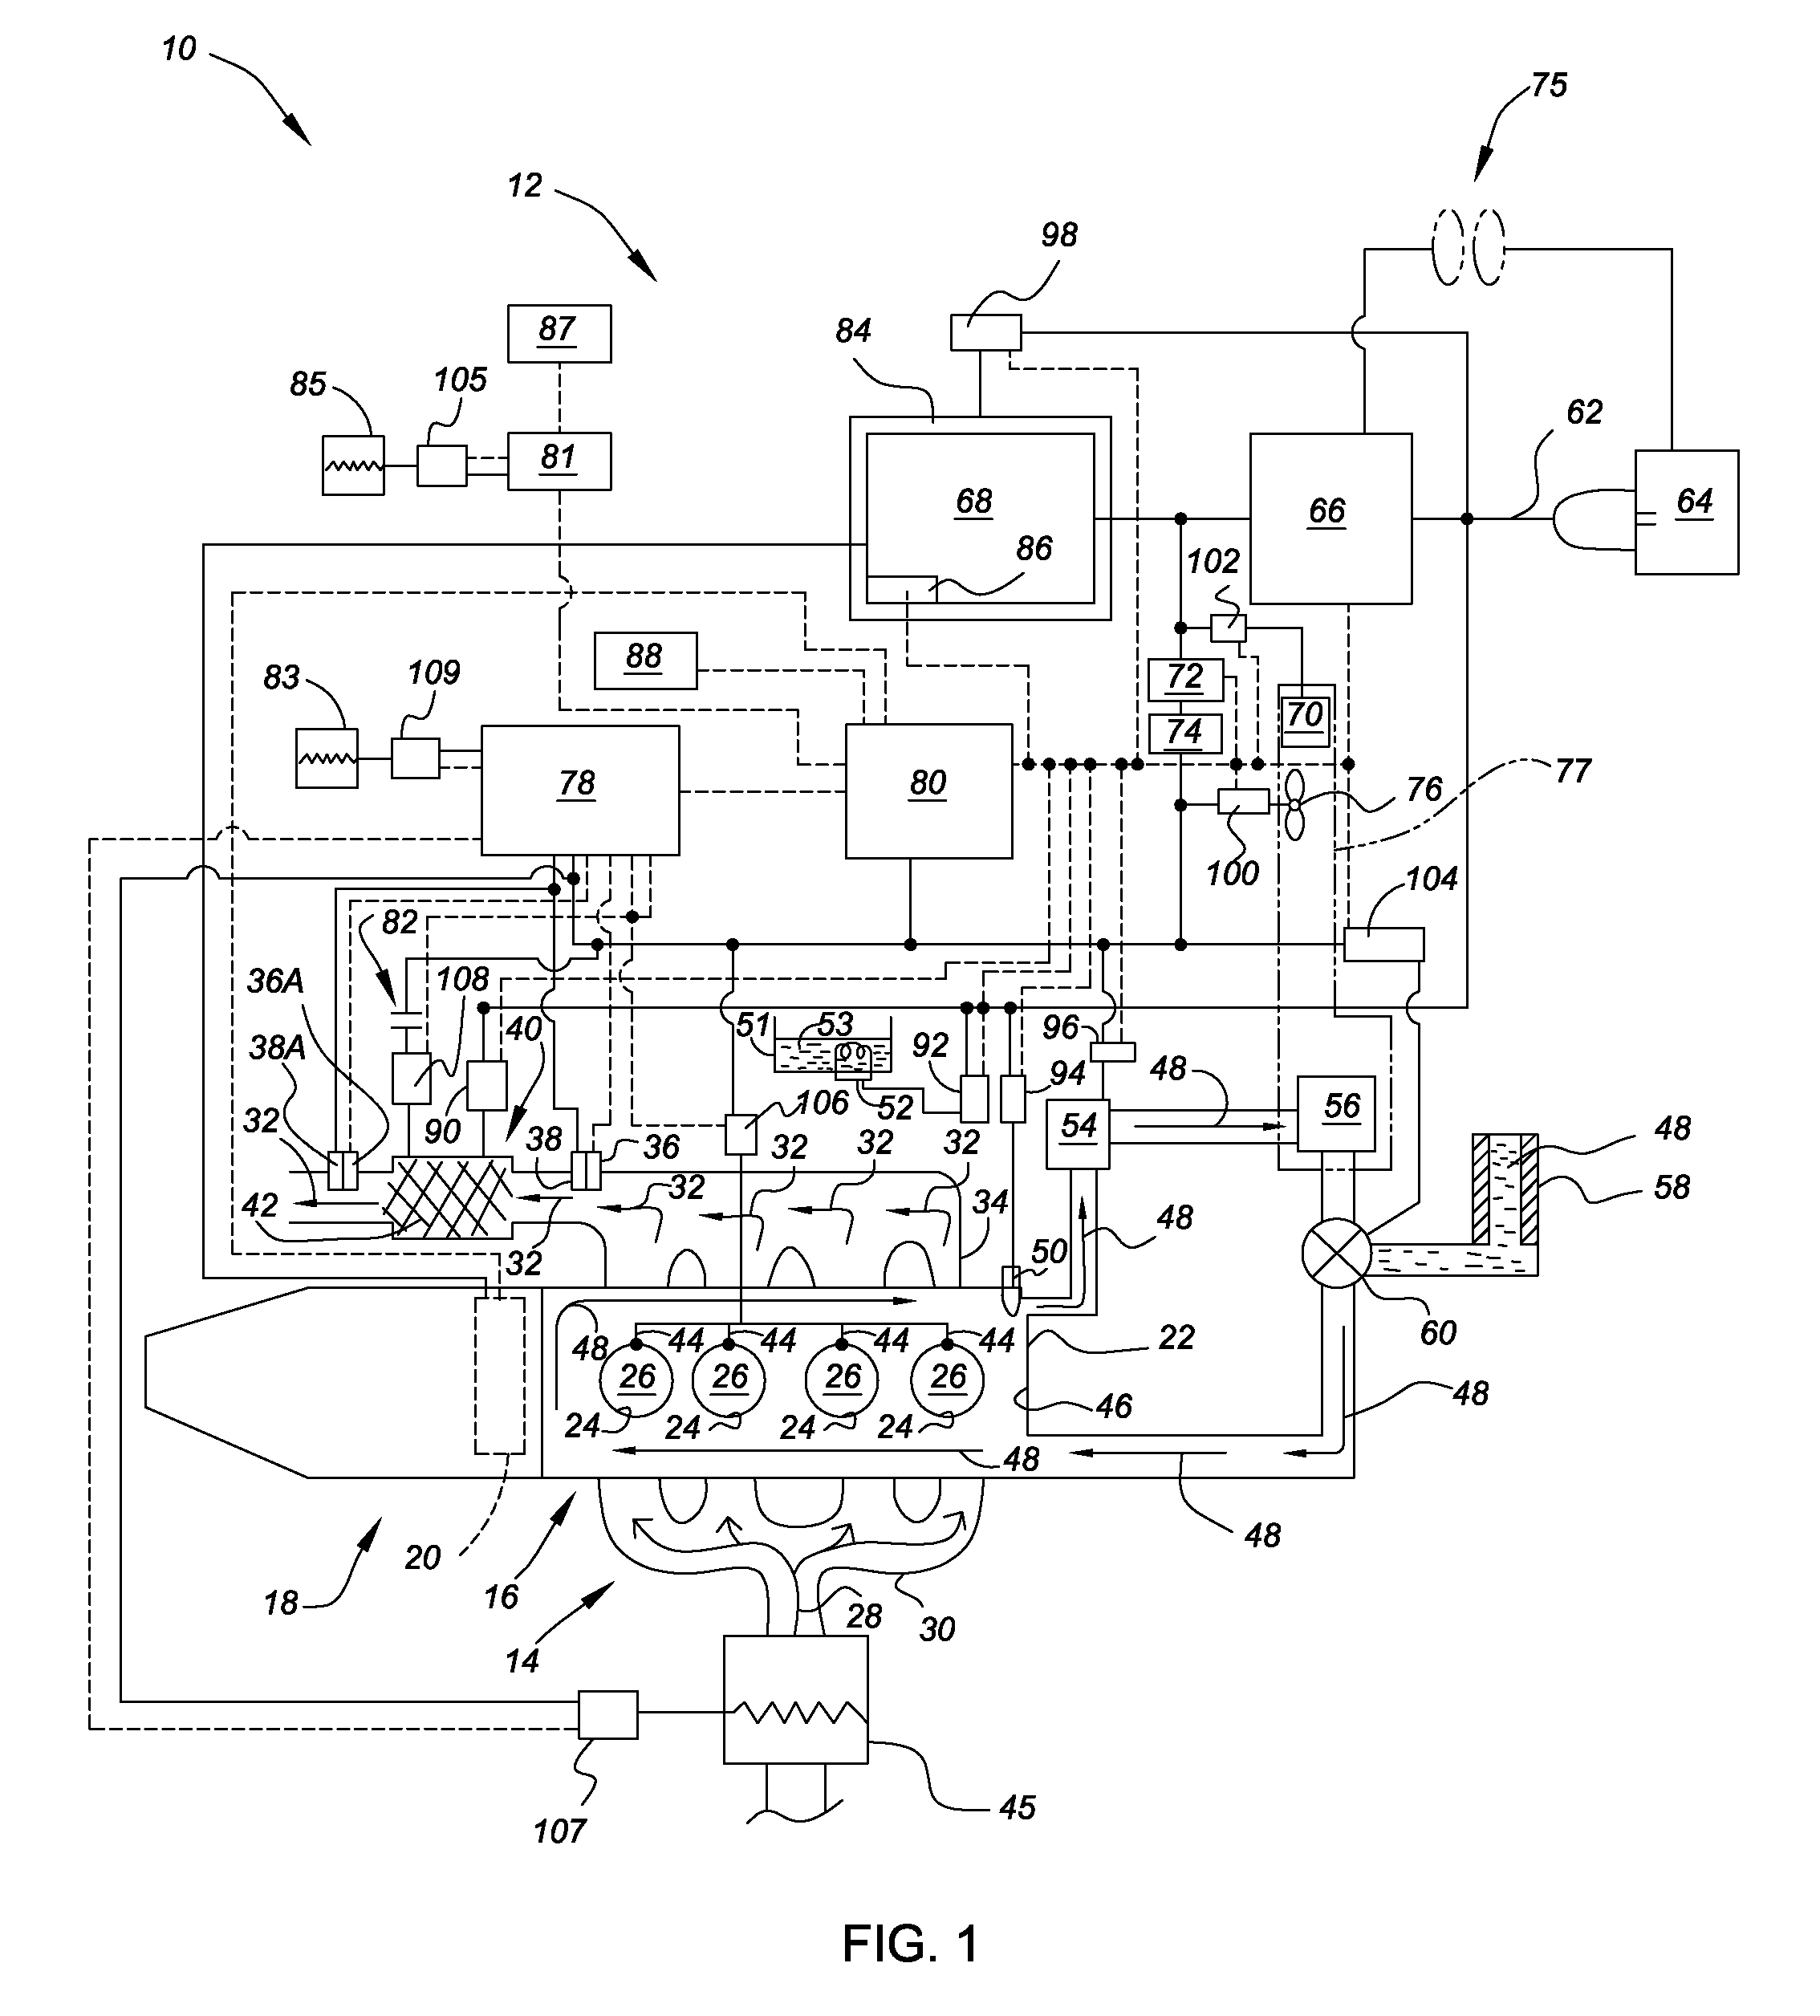 Method of operating a plug-in hybrid electric vehicle